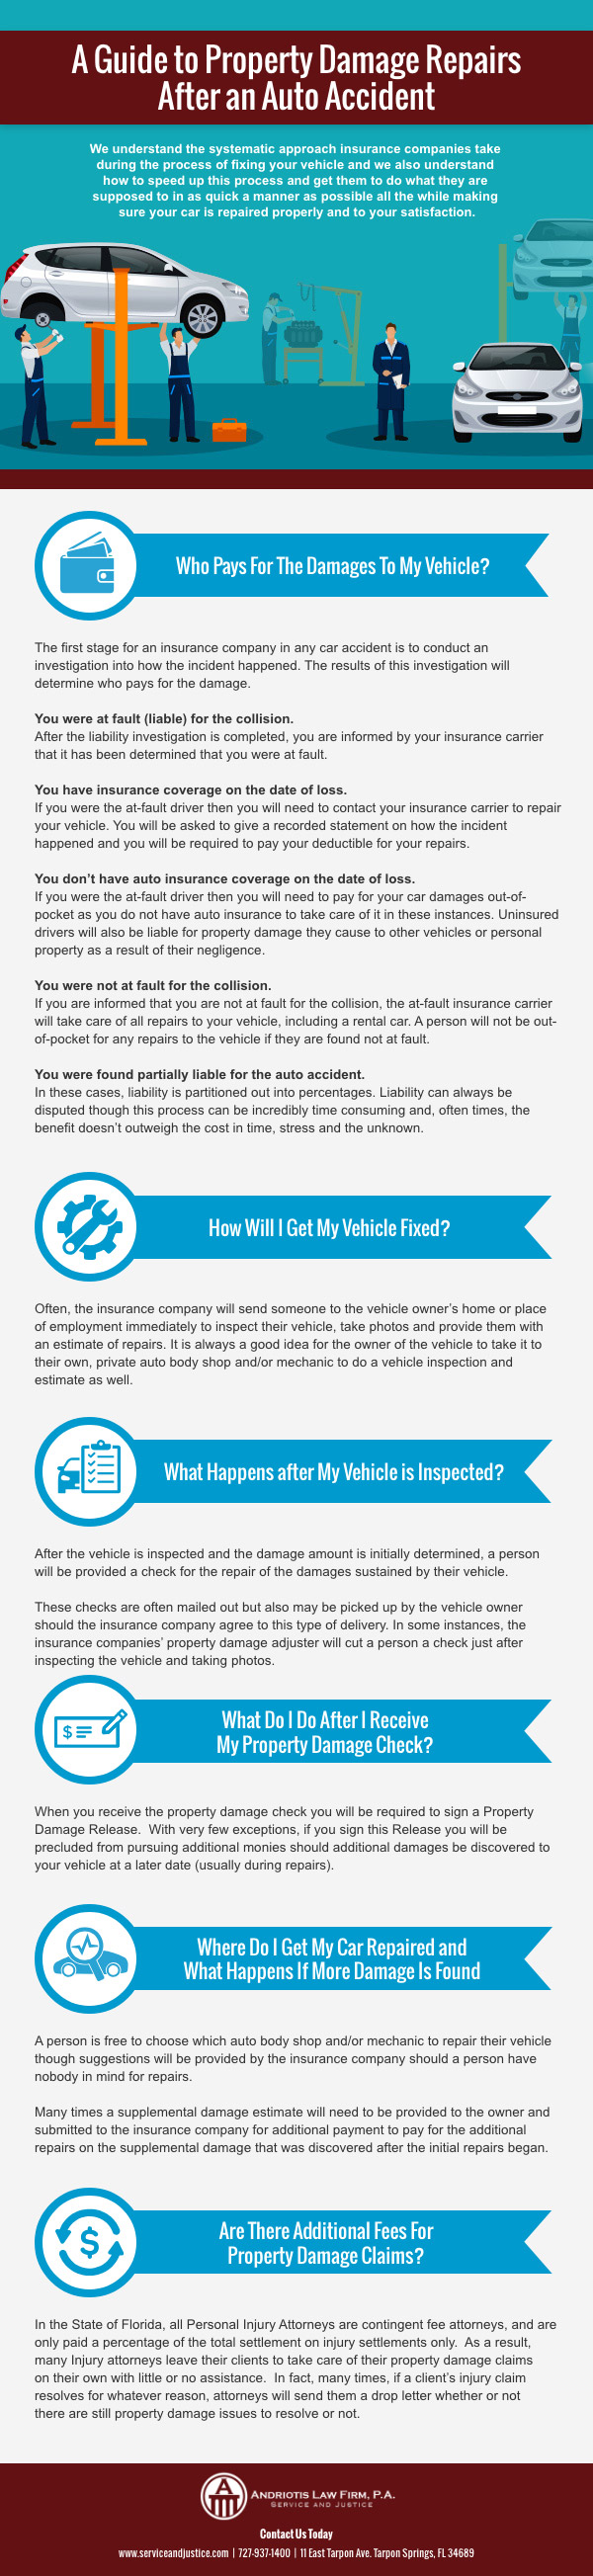 Guide to Repairing Your Car after An Auto Accident in Florida